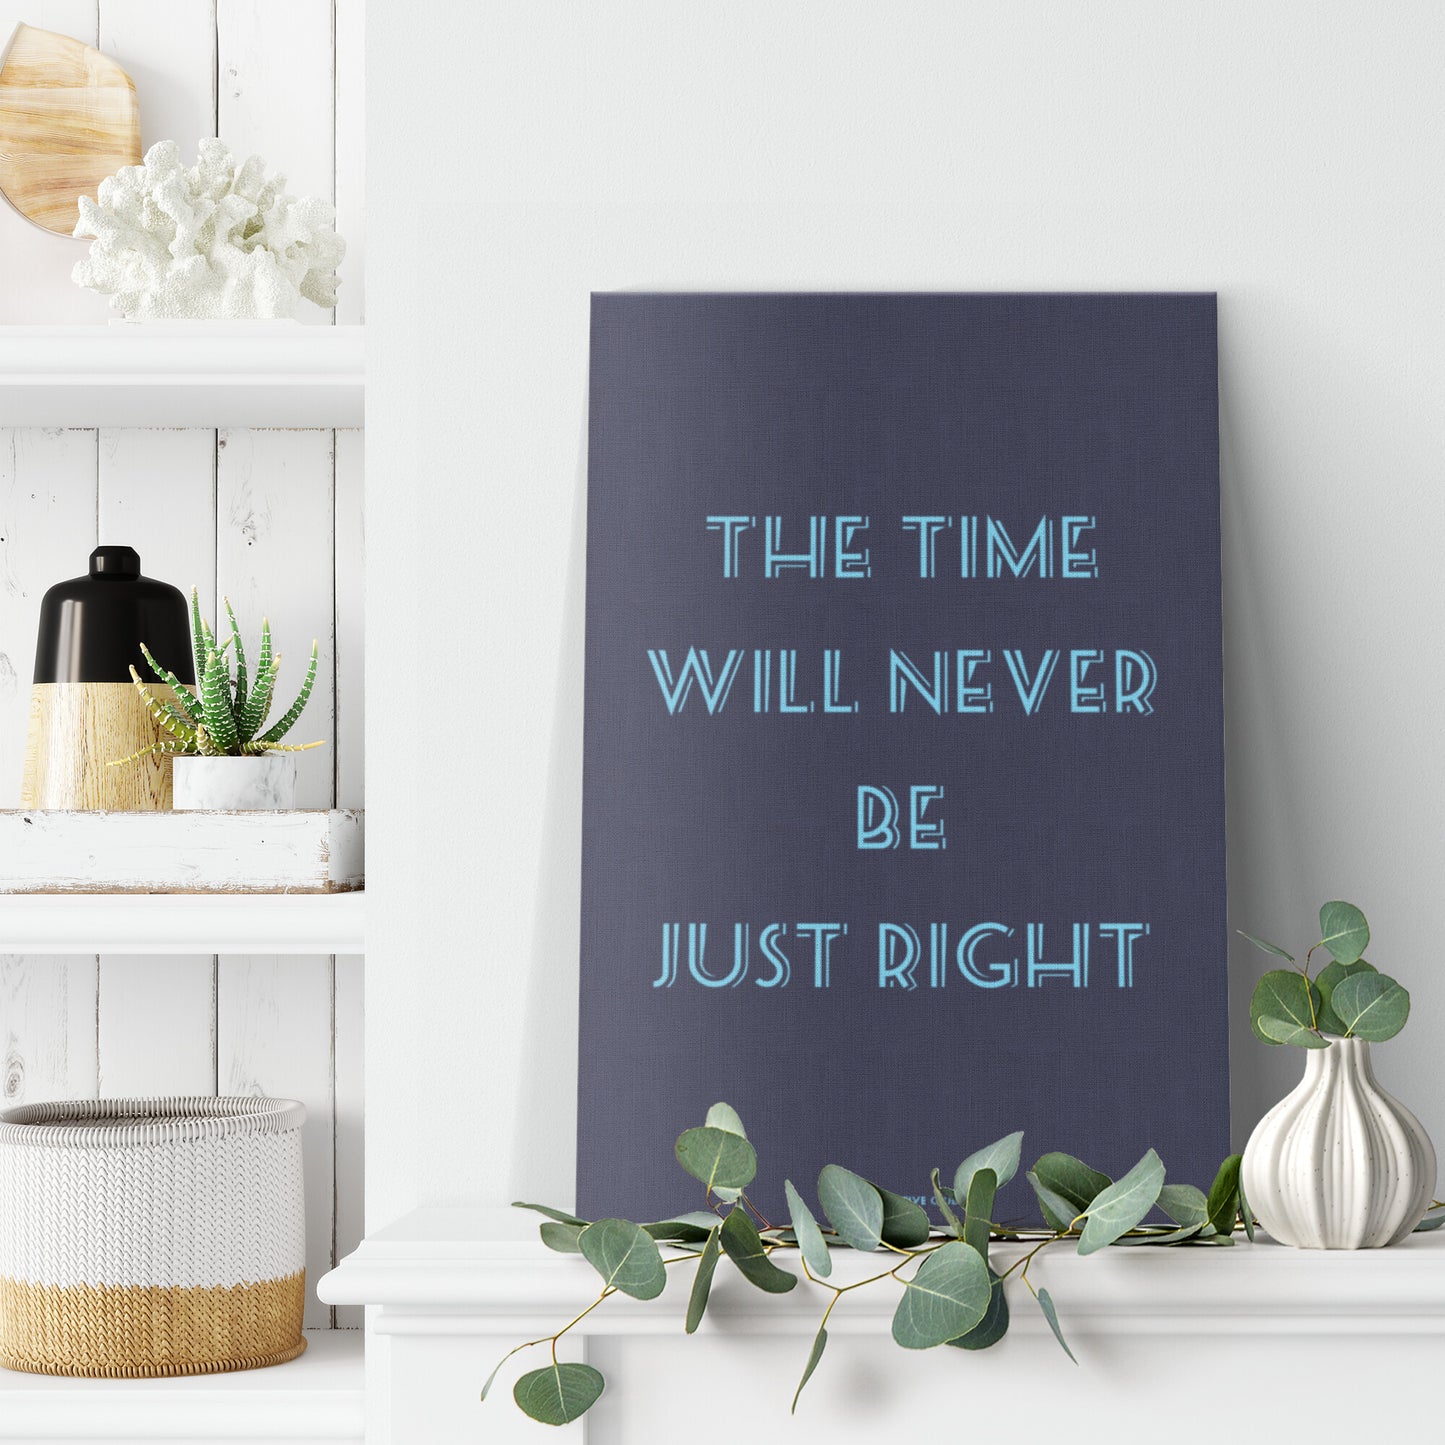 THE TIME WILL NEVER BE JUST RIGHT